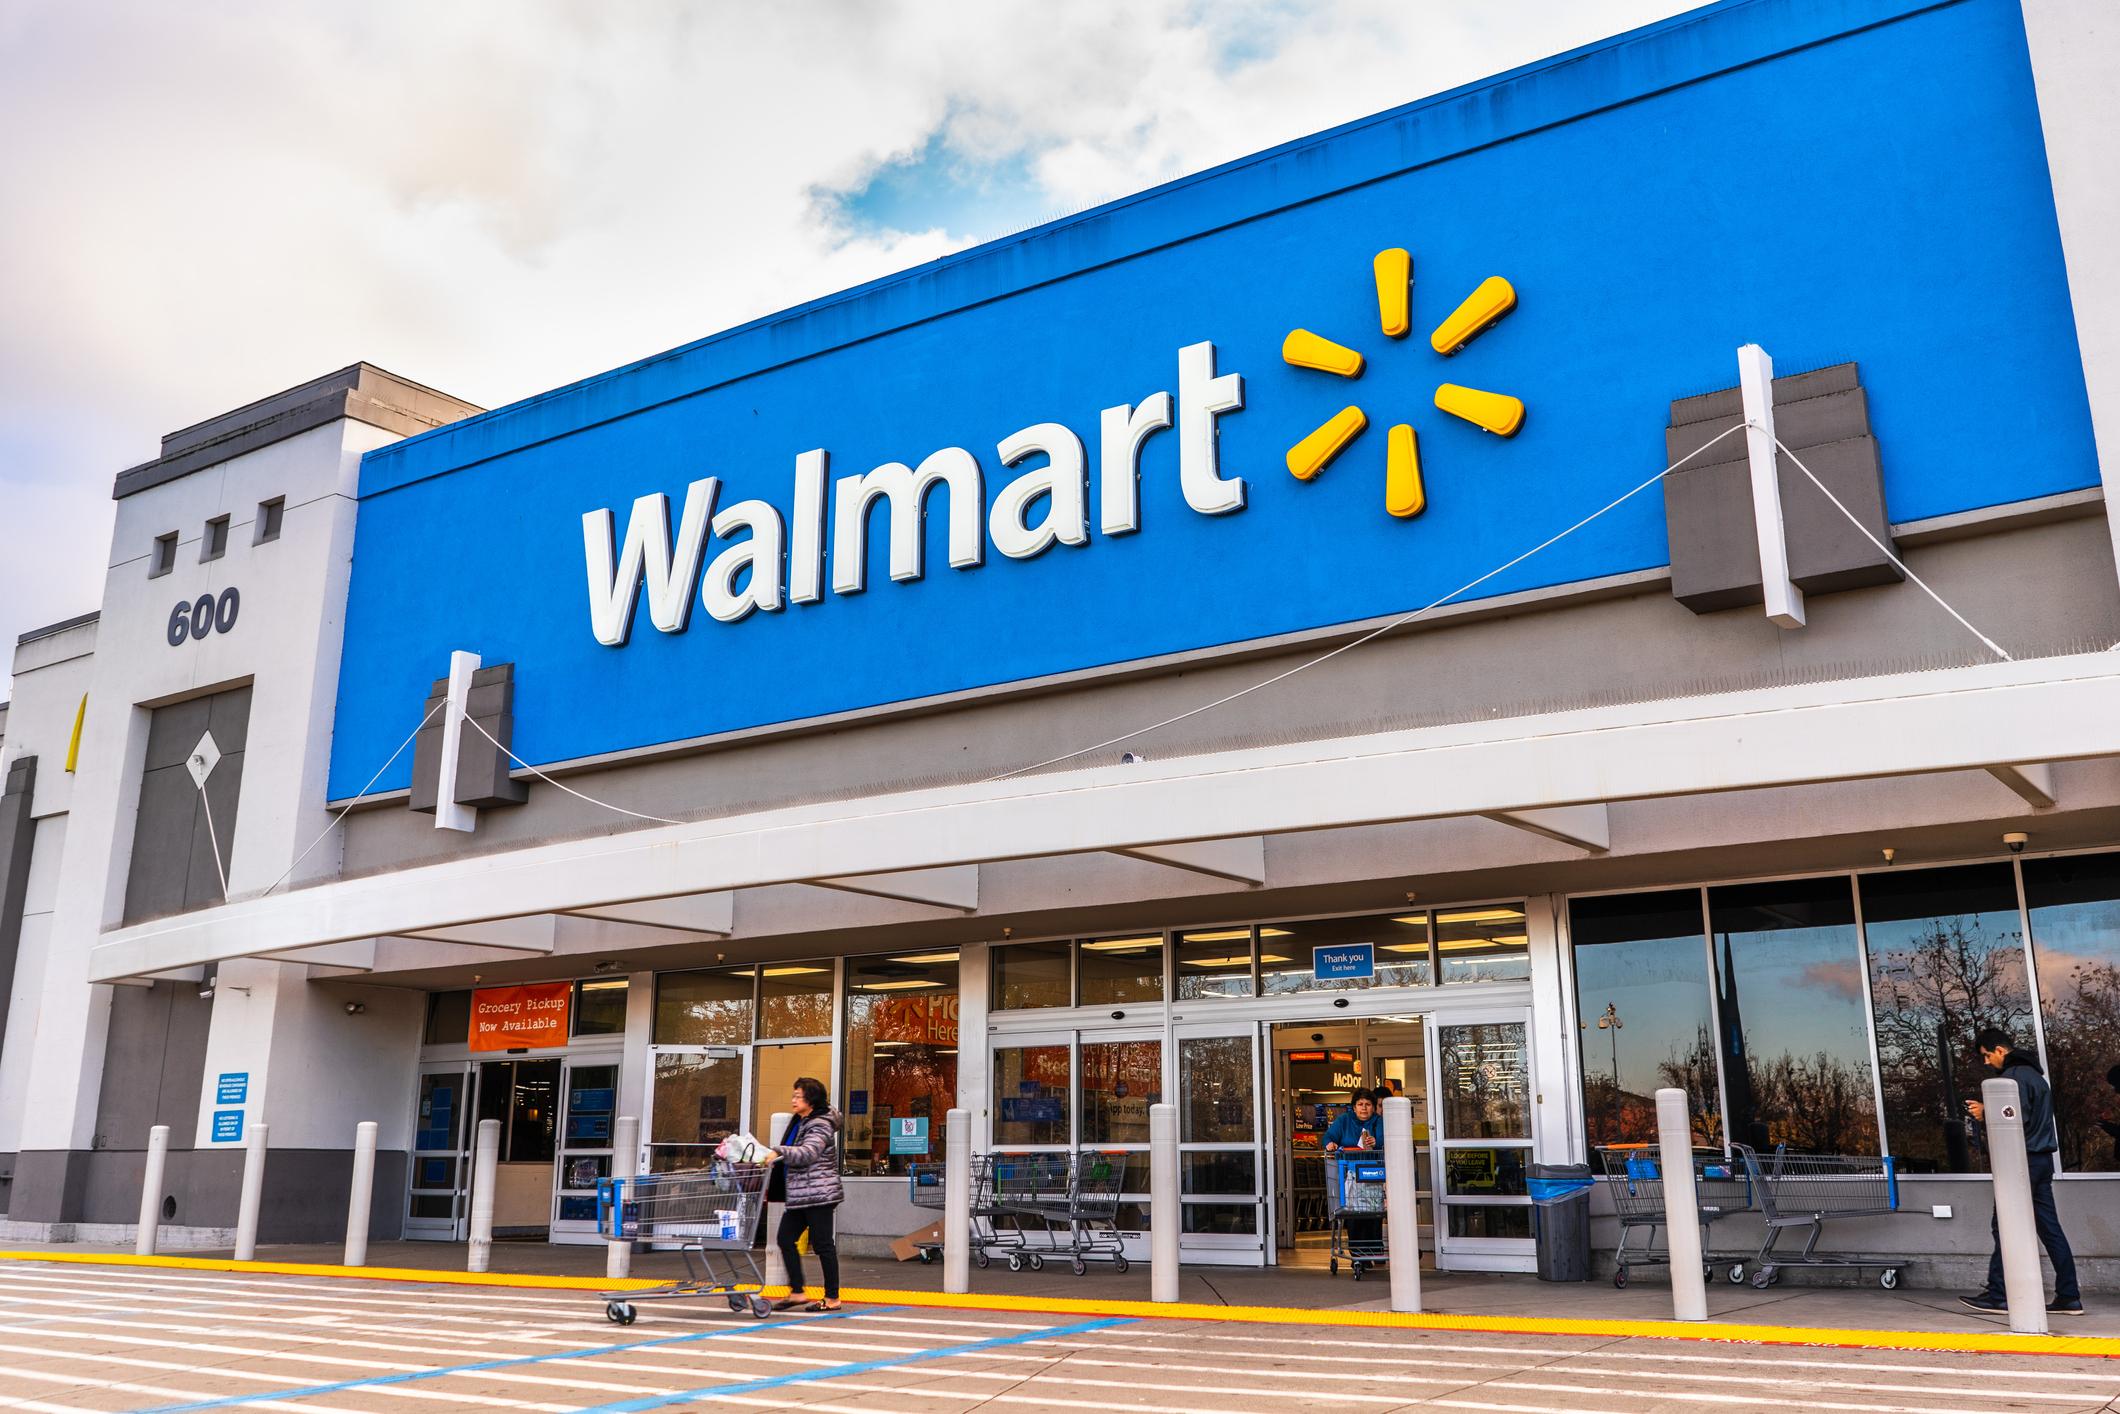 Walmart, Amazon, Netflix, and MetaMask — Top Scams and Phishing Attempts This Week